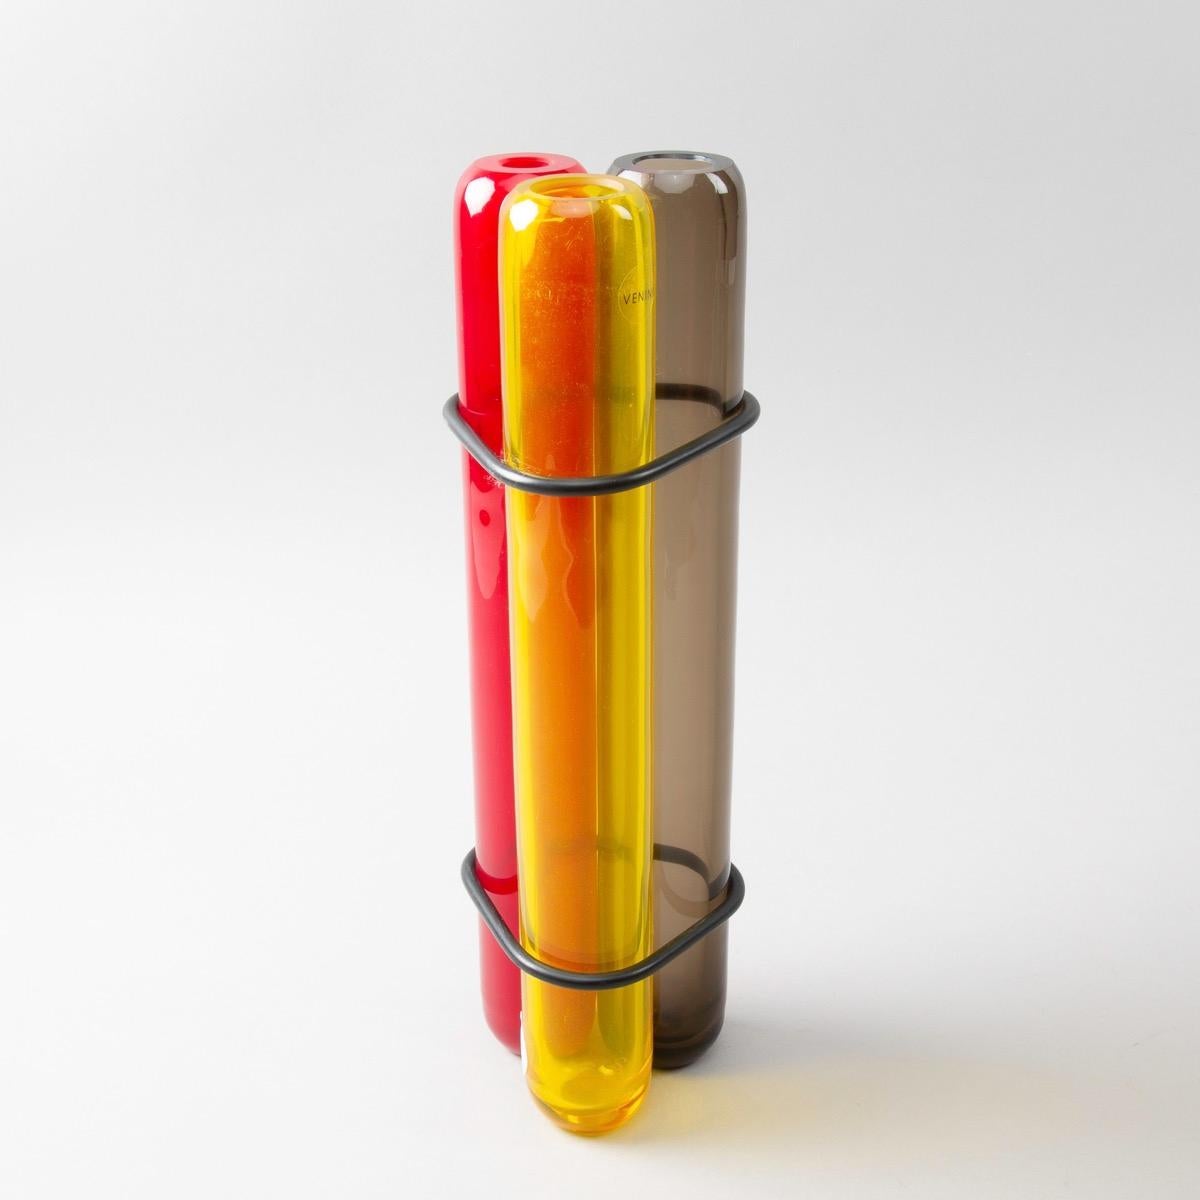 A rare vase designed by Pierre Charpin in 2003, manufactured the same year at Venini.

A very simple and efficient idea of 3 mouth blown glass (dark amber, red and yellow) tubes joined together with rubber o-rings.

The piece is signed with